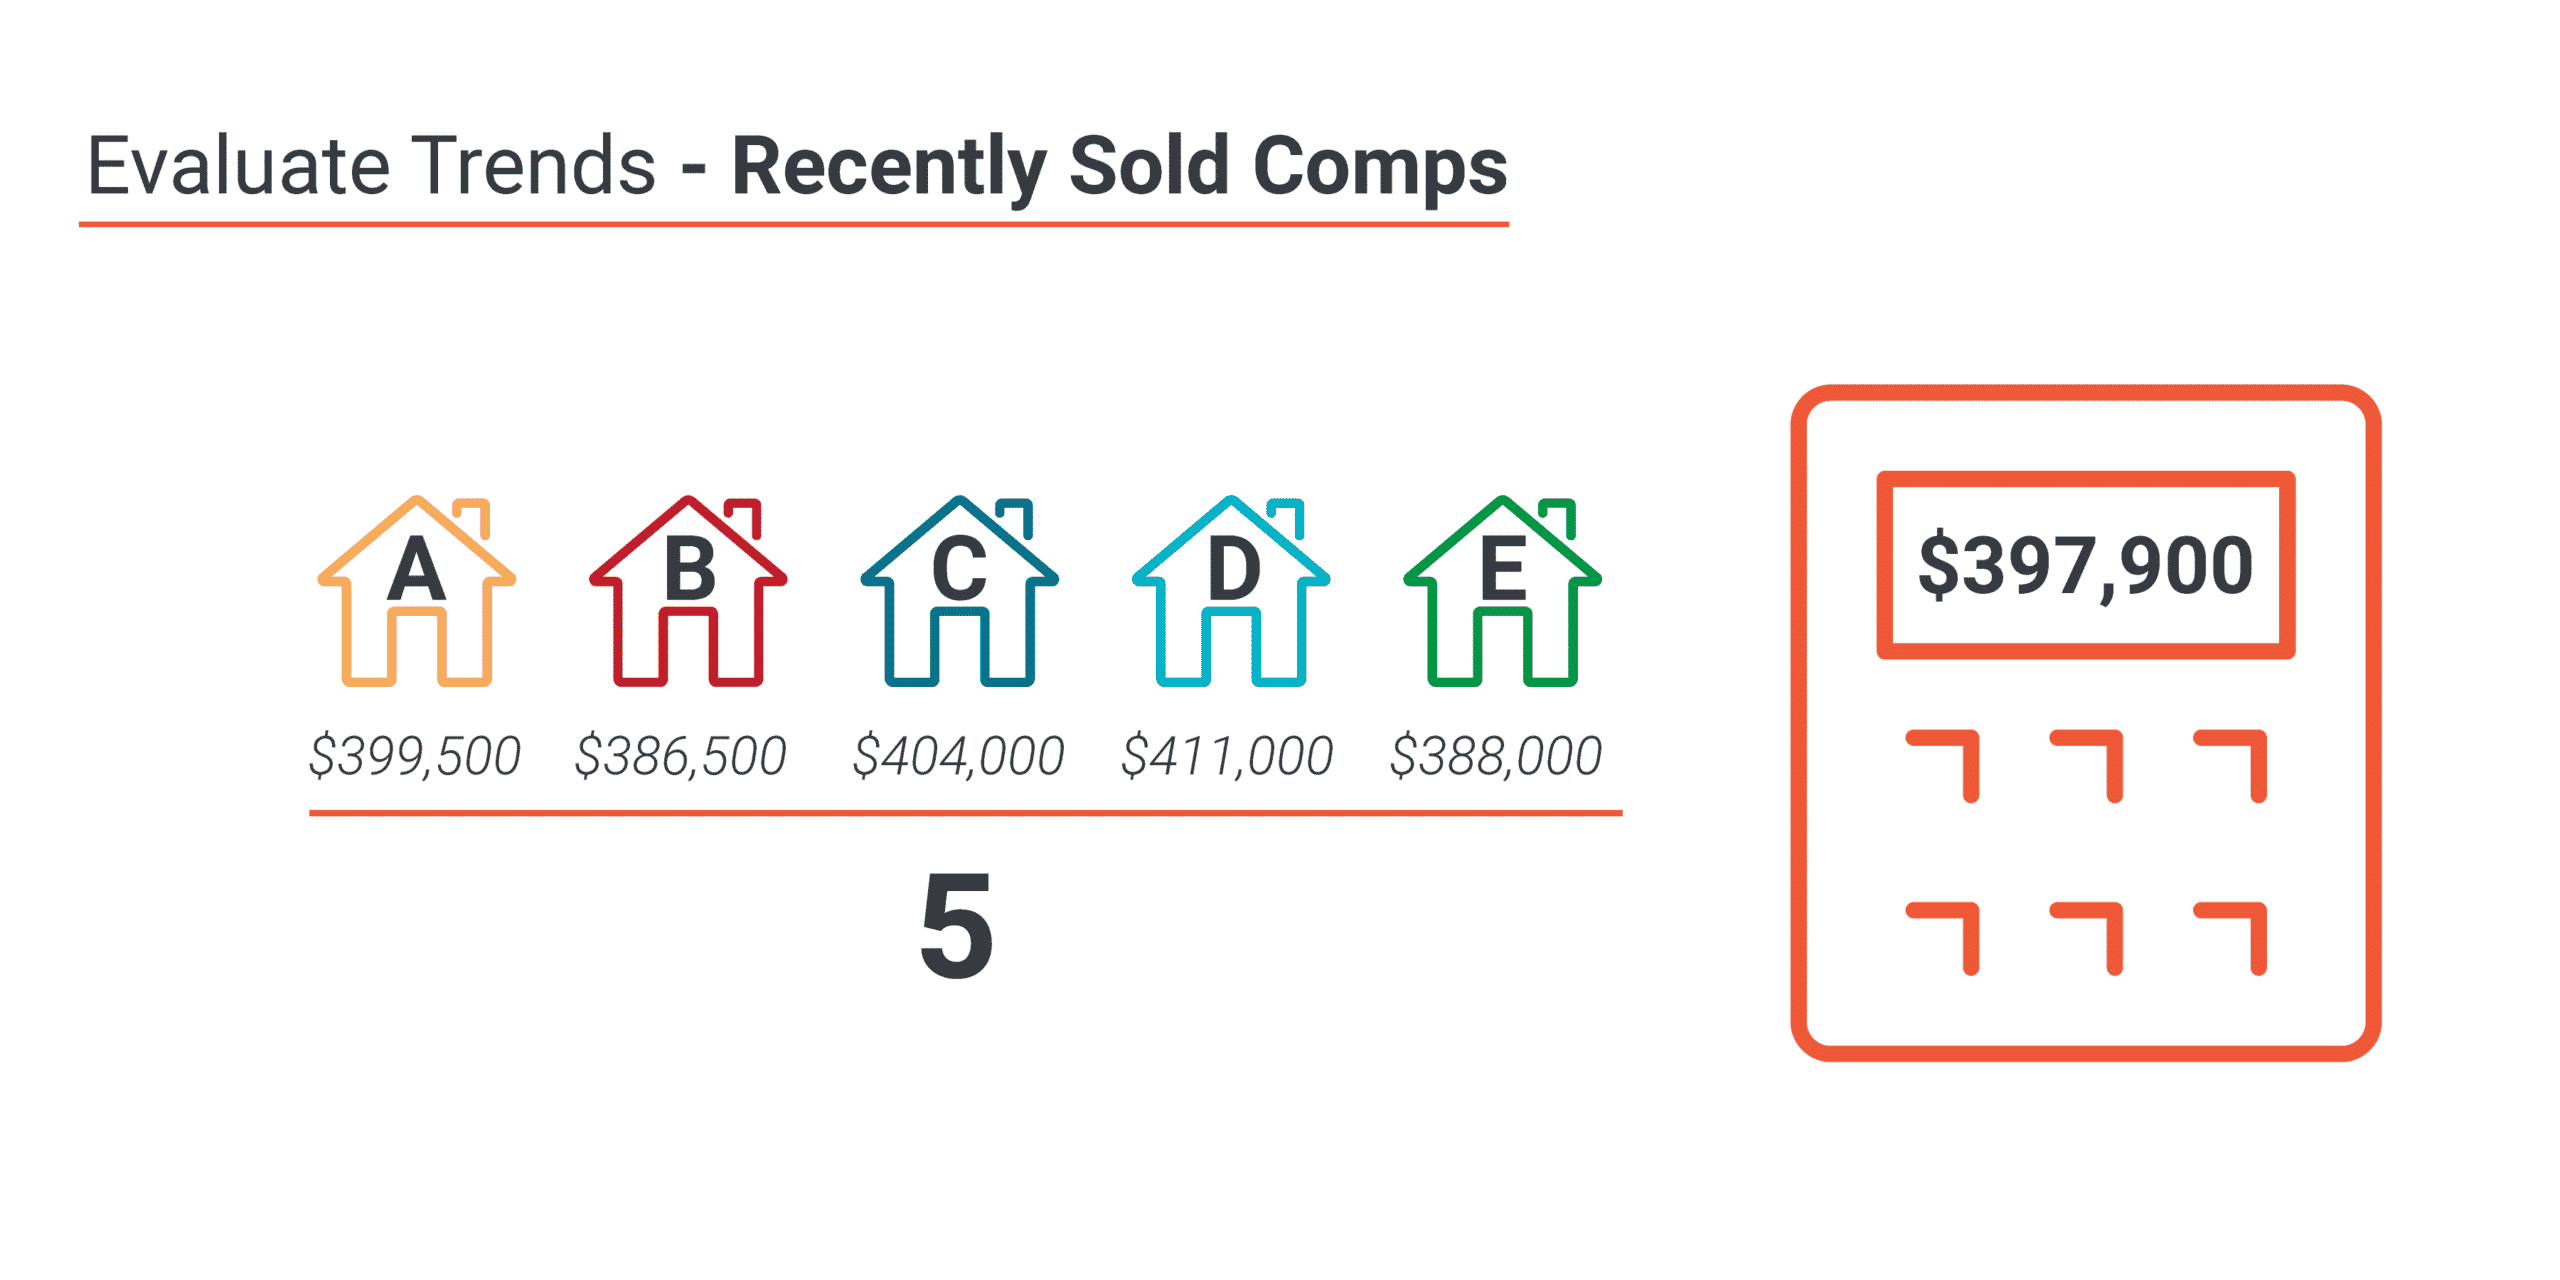 Evaluate Trends - Recently Sold Comps